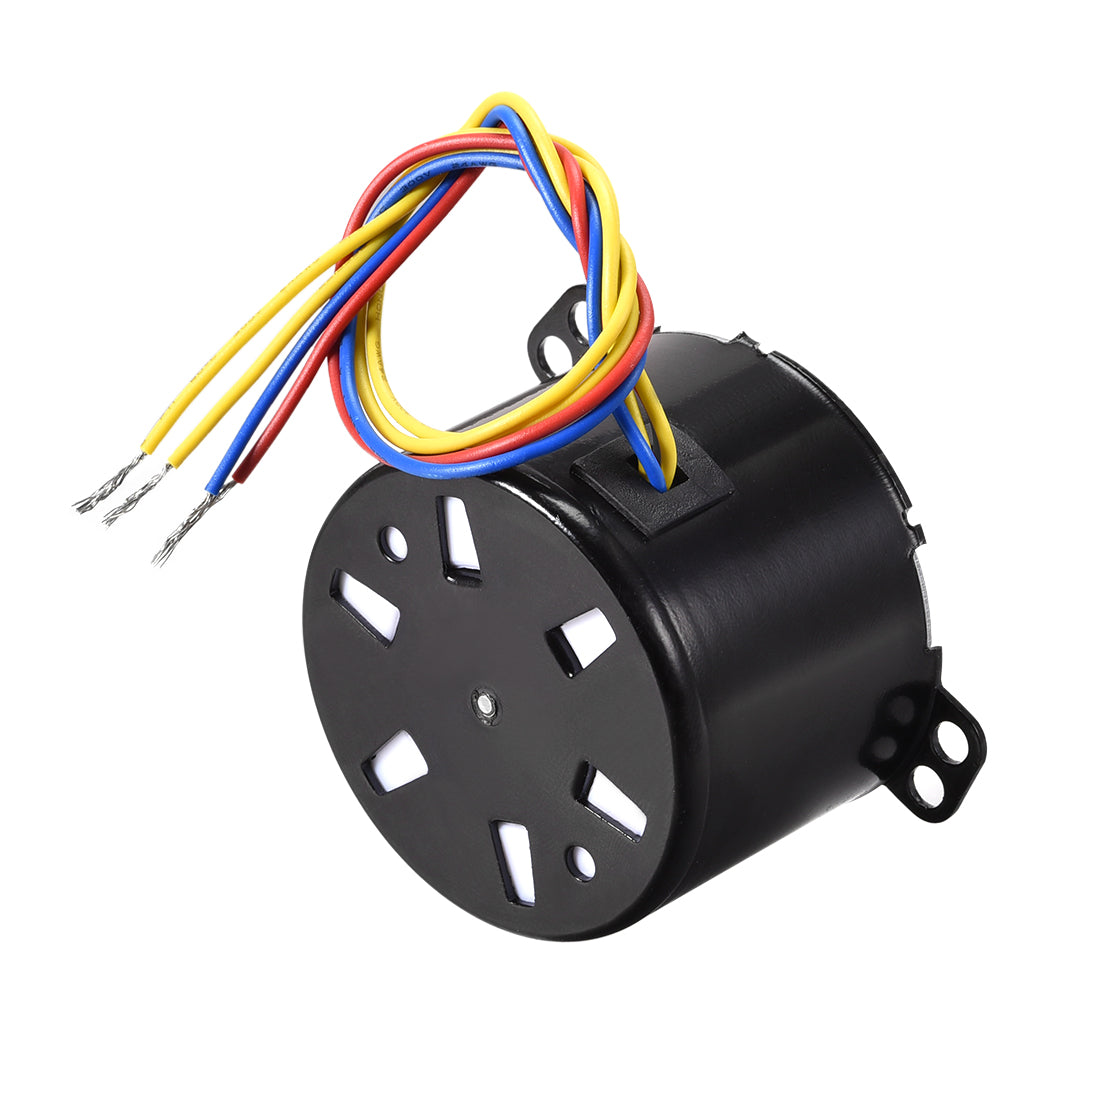 uxcell Uxcell AC 220V Electric Synchronous Motor Plastic Gear Turntable /C 1RPM 50-60HZ 6W 7mm Dia Eccentric Shaft with Hole